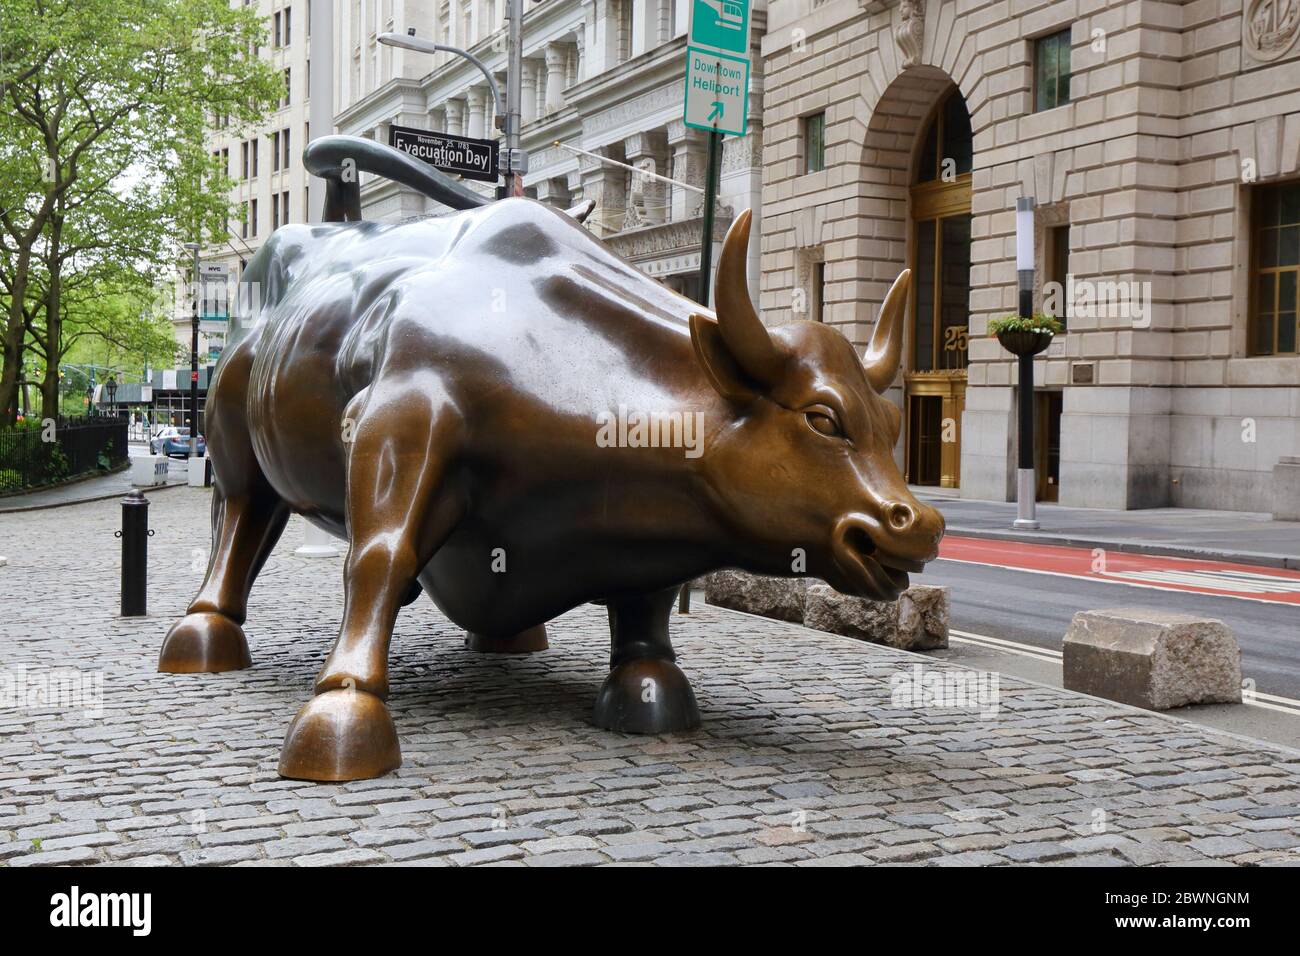 Charging Bull by Arturo Di Modica. A bronze sculpture that has come to represent Wall Street, located at Bowling Green, Manhattan, New York. no people Stock Photo